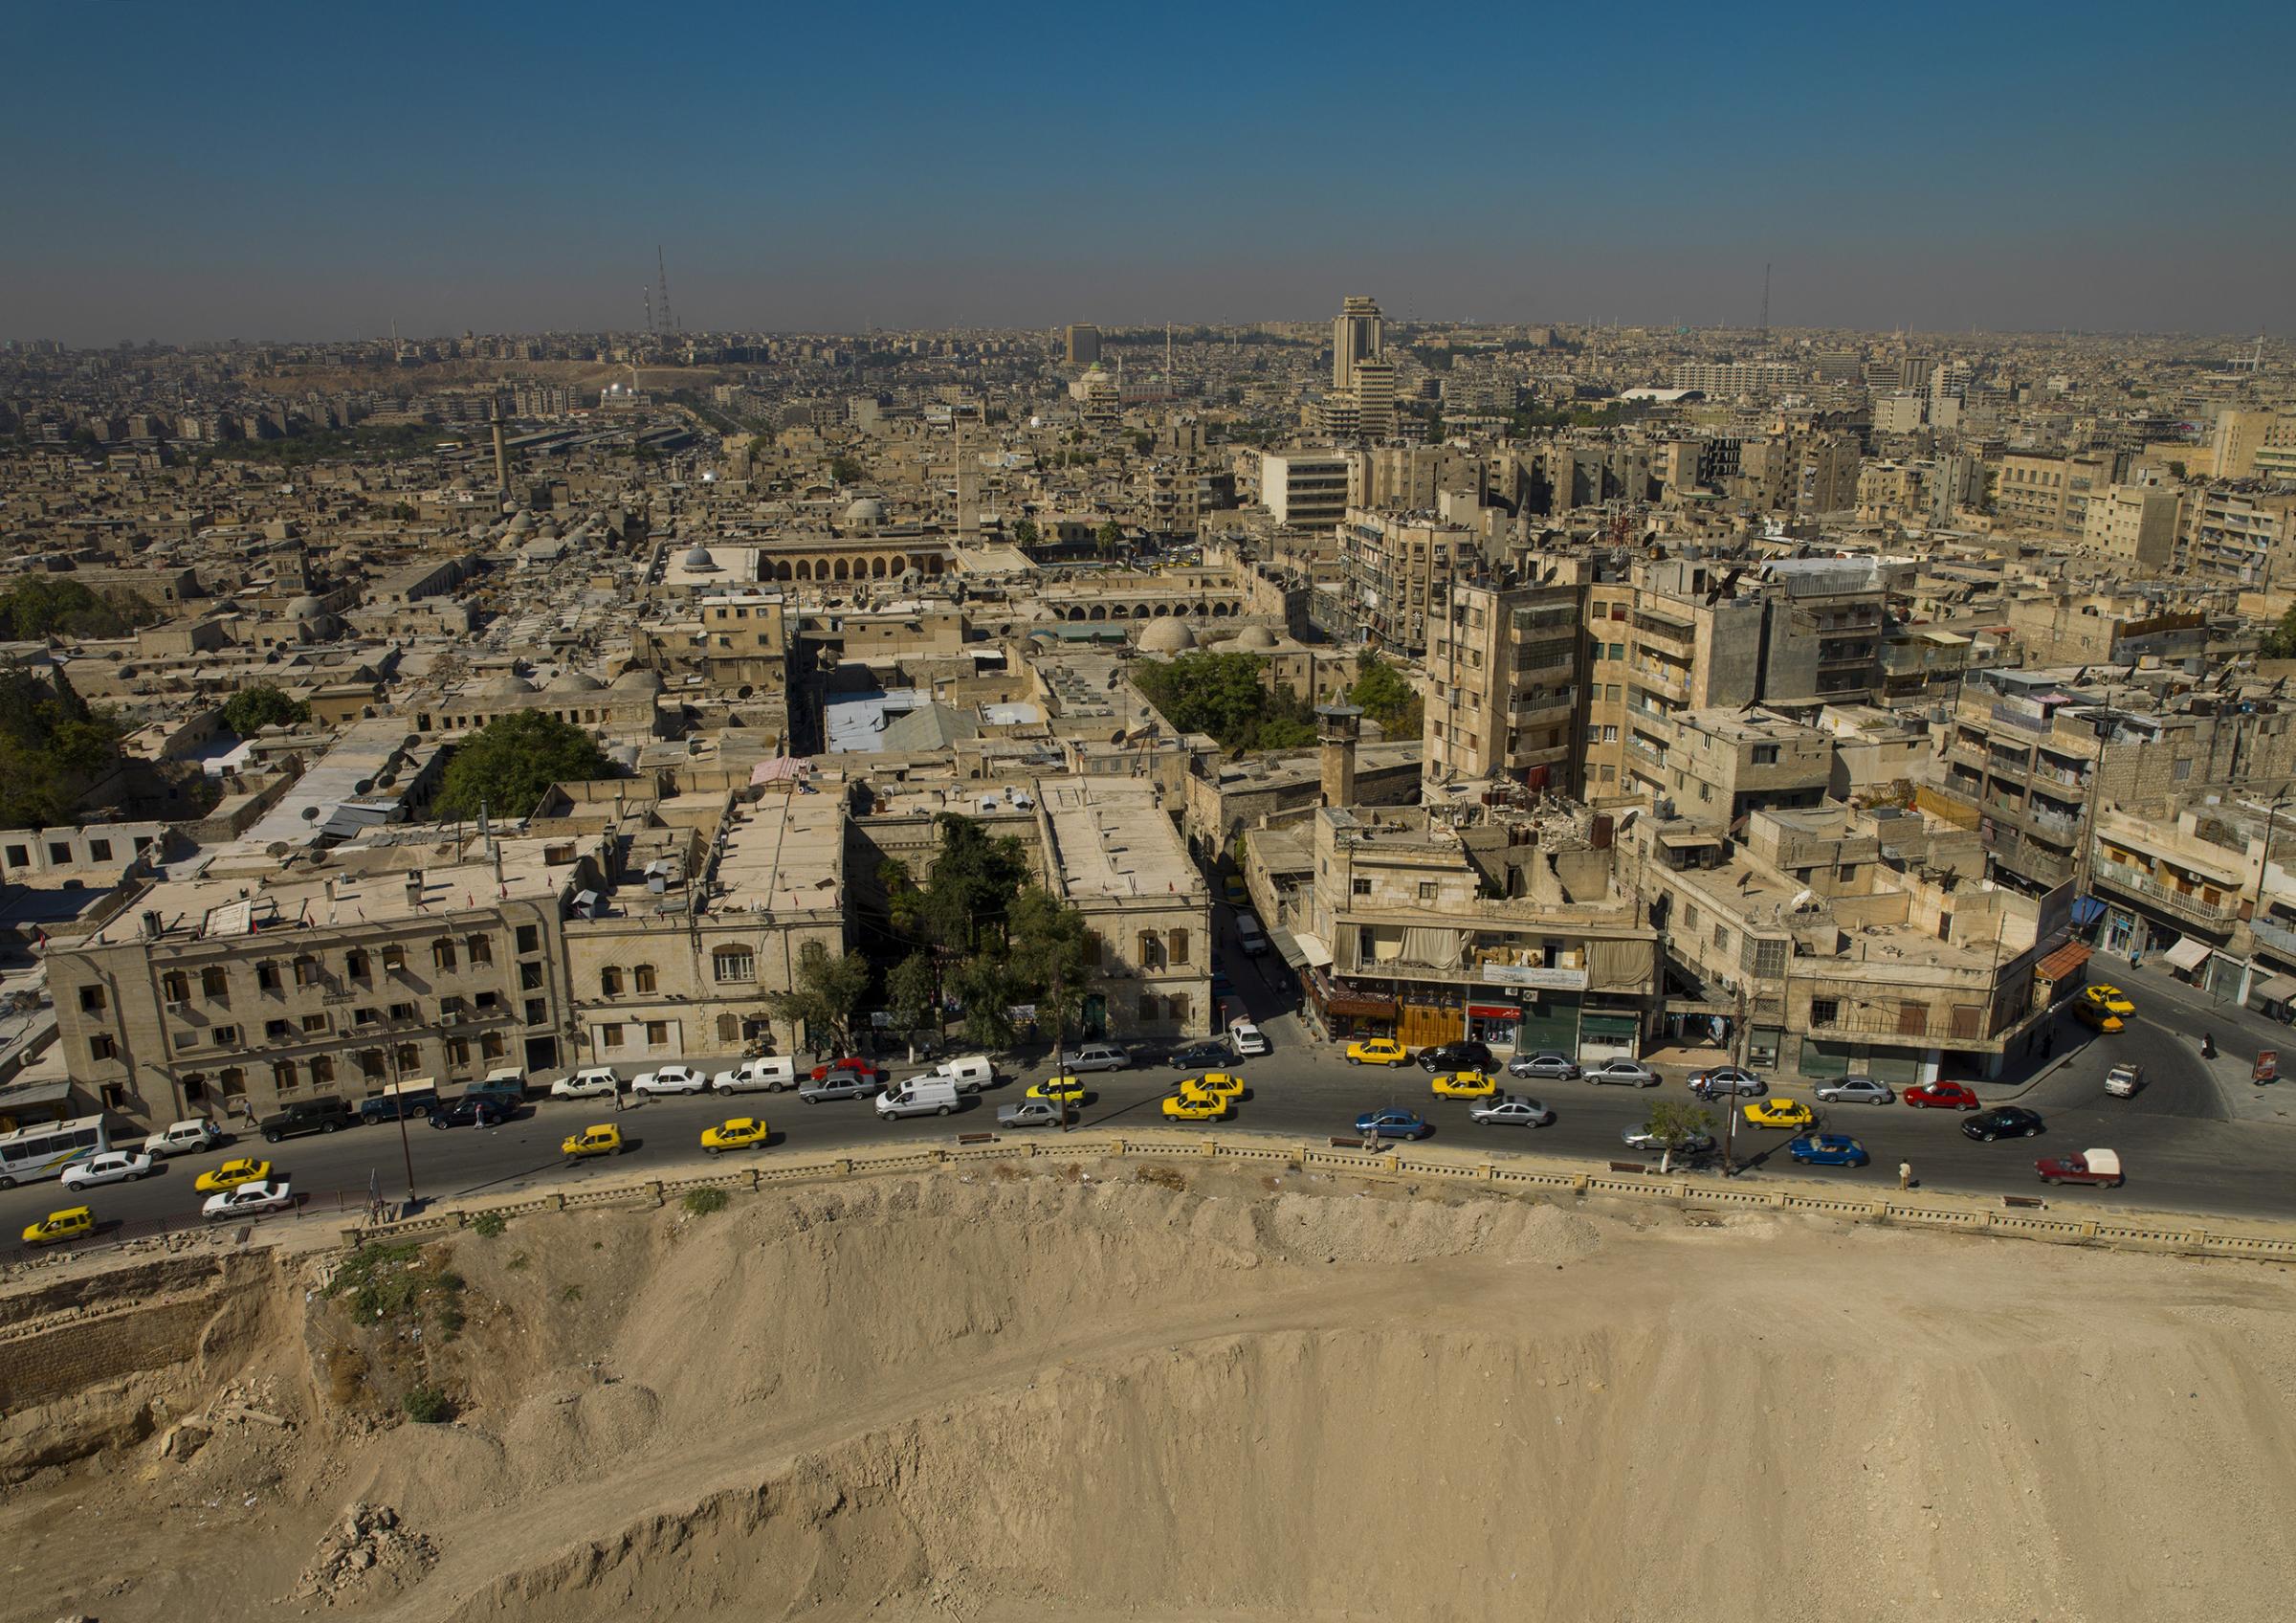 A sweeping view of Aleppo, Syria, on Oct. 5, 2006. Aleppo was famous for its architecture, attractive churches, mosques, schools and baths, and became an important center of trade between the eastern Mediterranean kingdoms and the merchants of Venice.